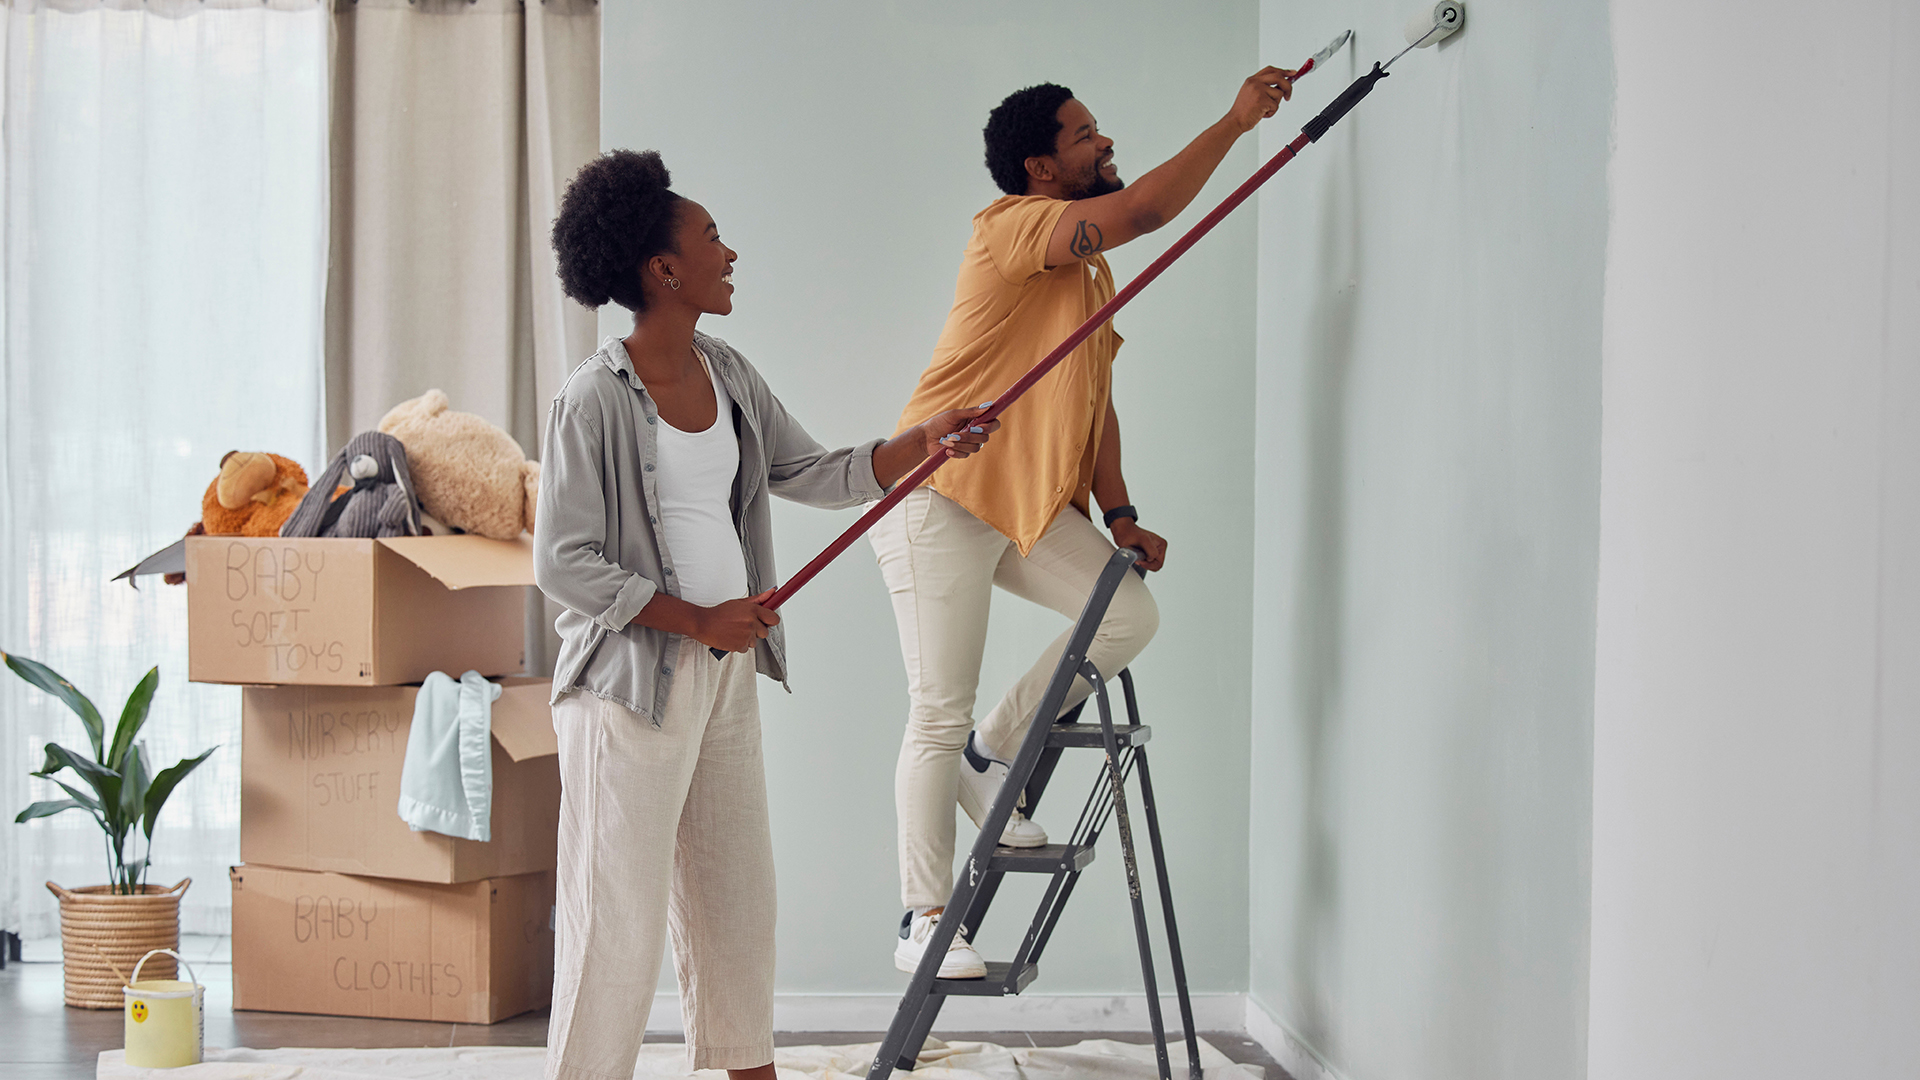 How to Paint a Room Like a Pro: Step-by-Step Guide